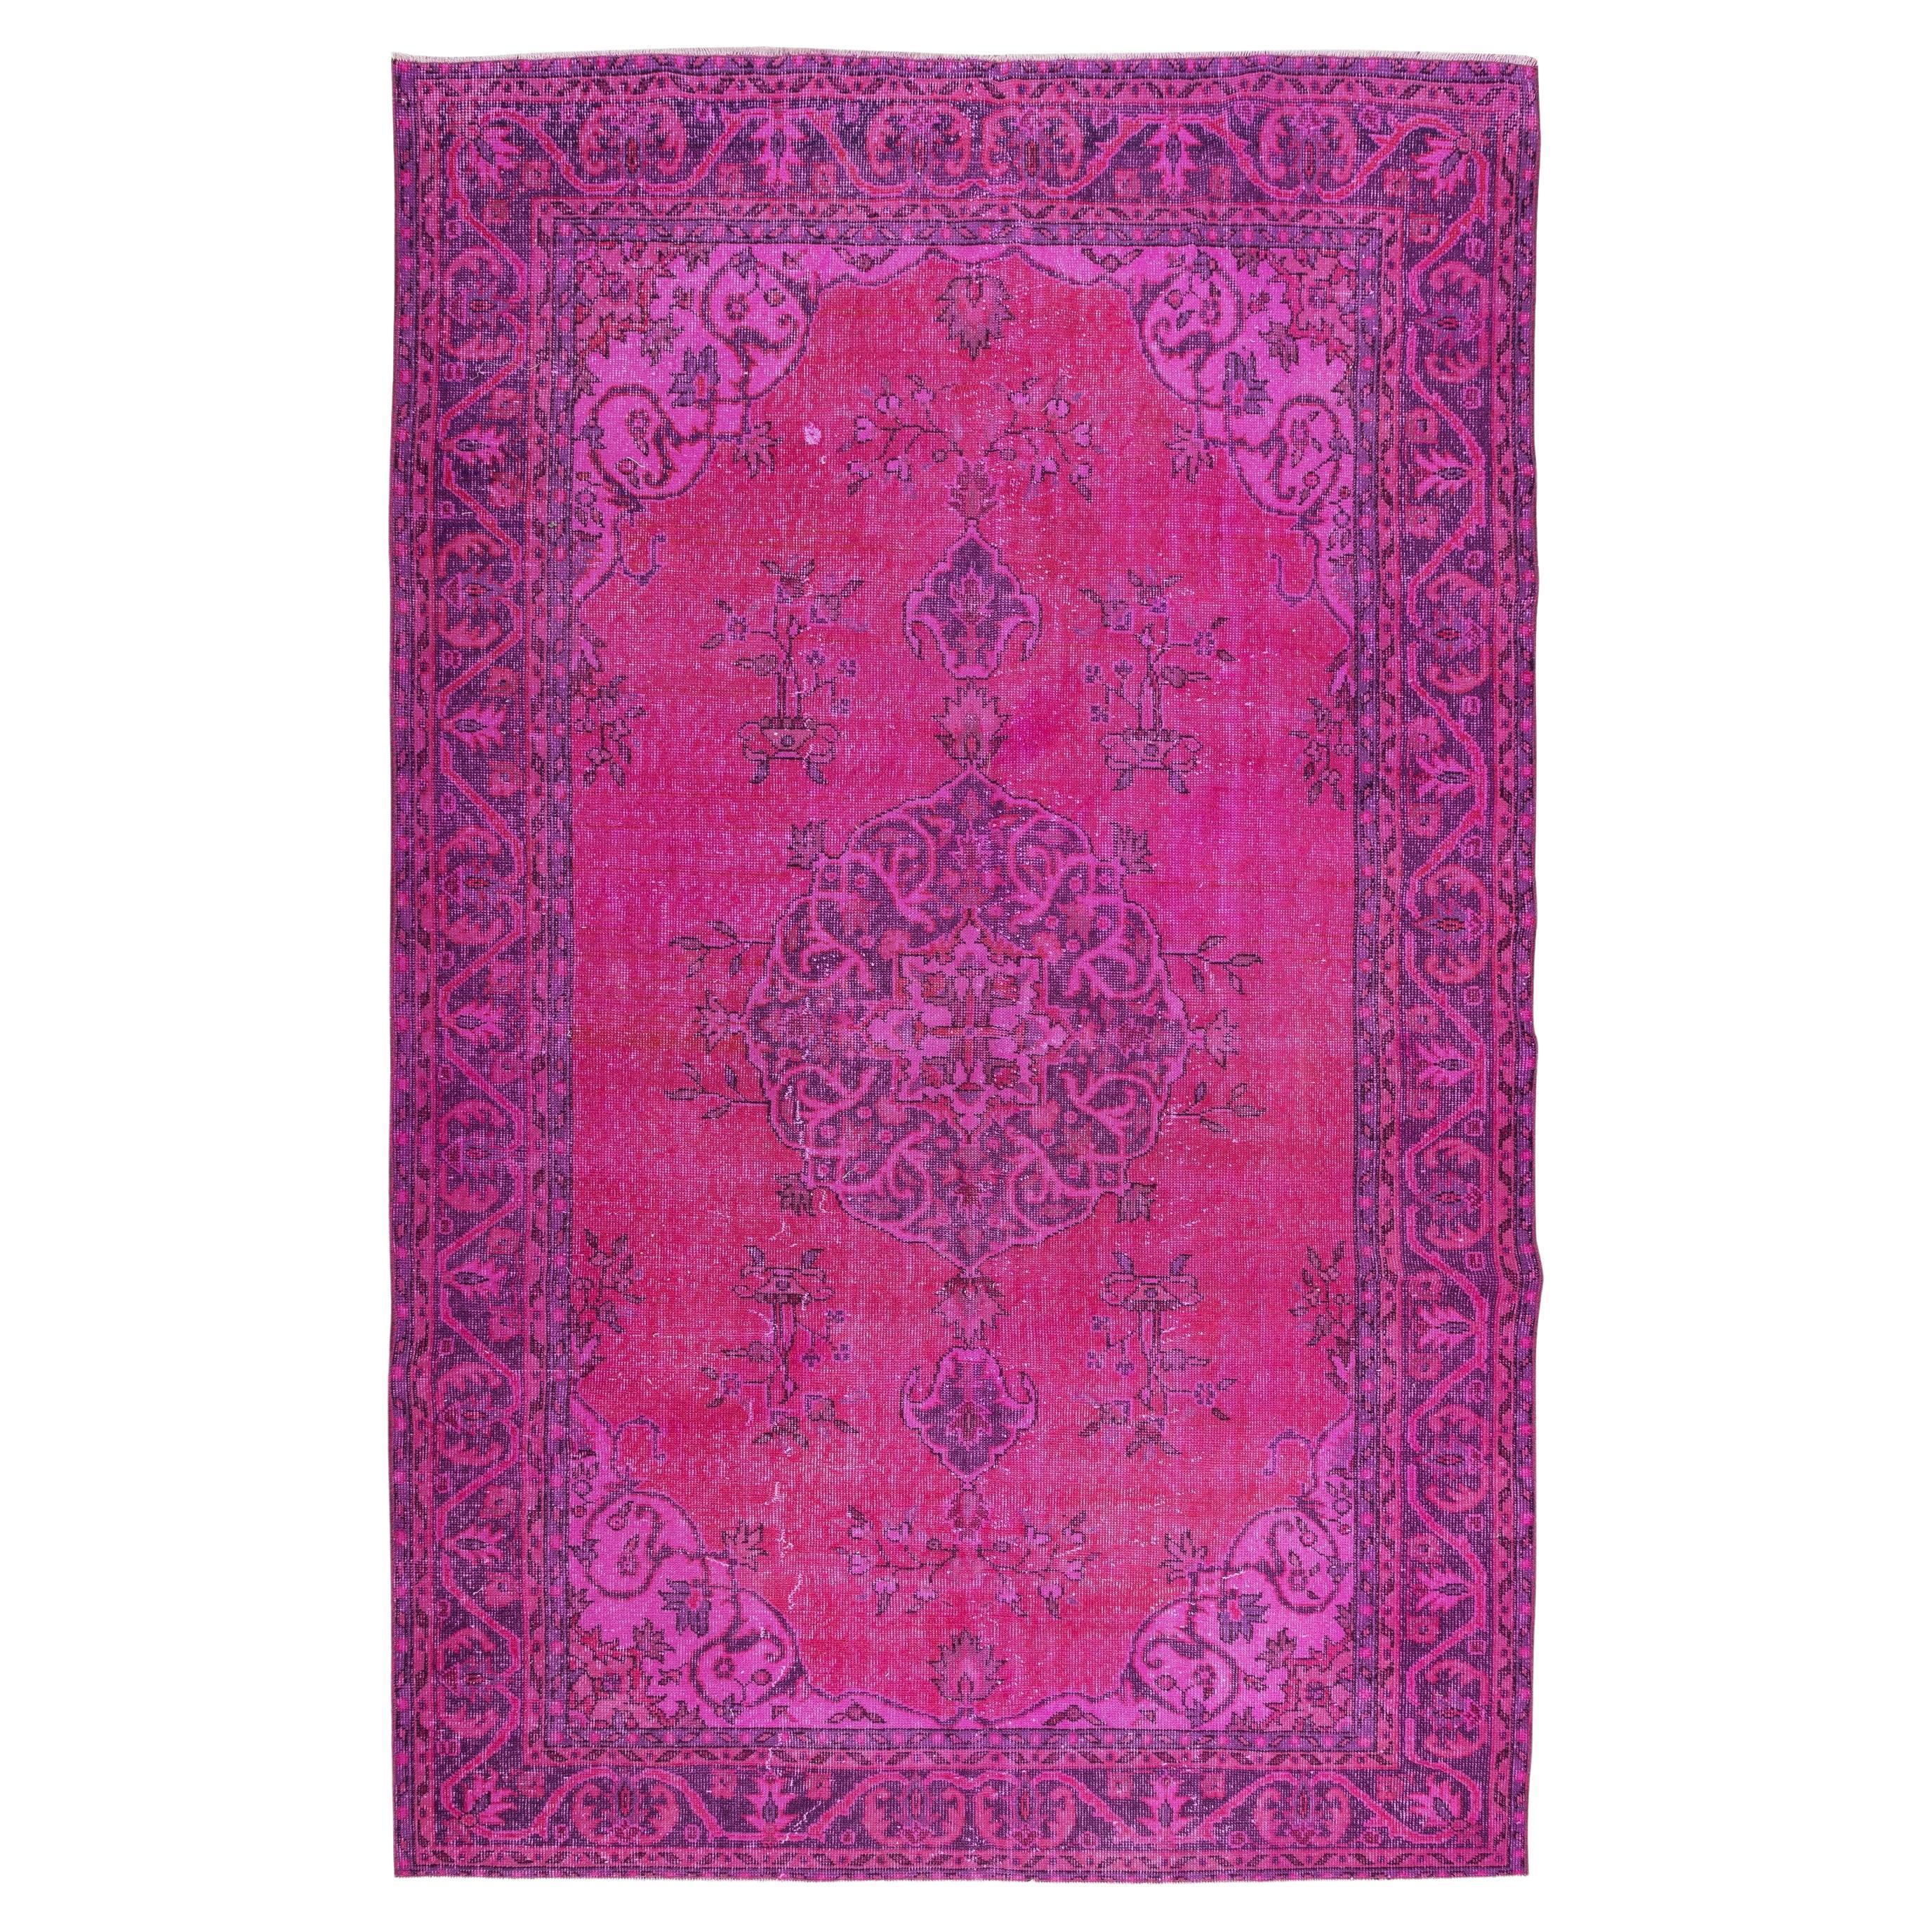 6x9.8 Ft Handmade Medallion Design Turkish Vintage Rug Over-Dyed in Fuchsia Pink For Sale